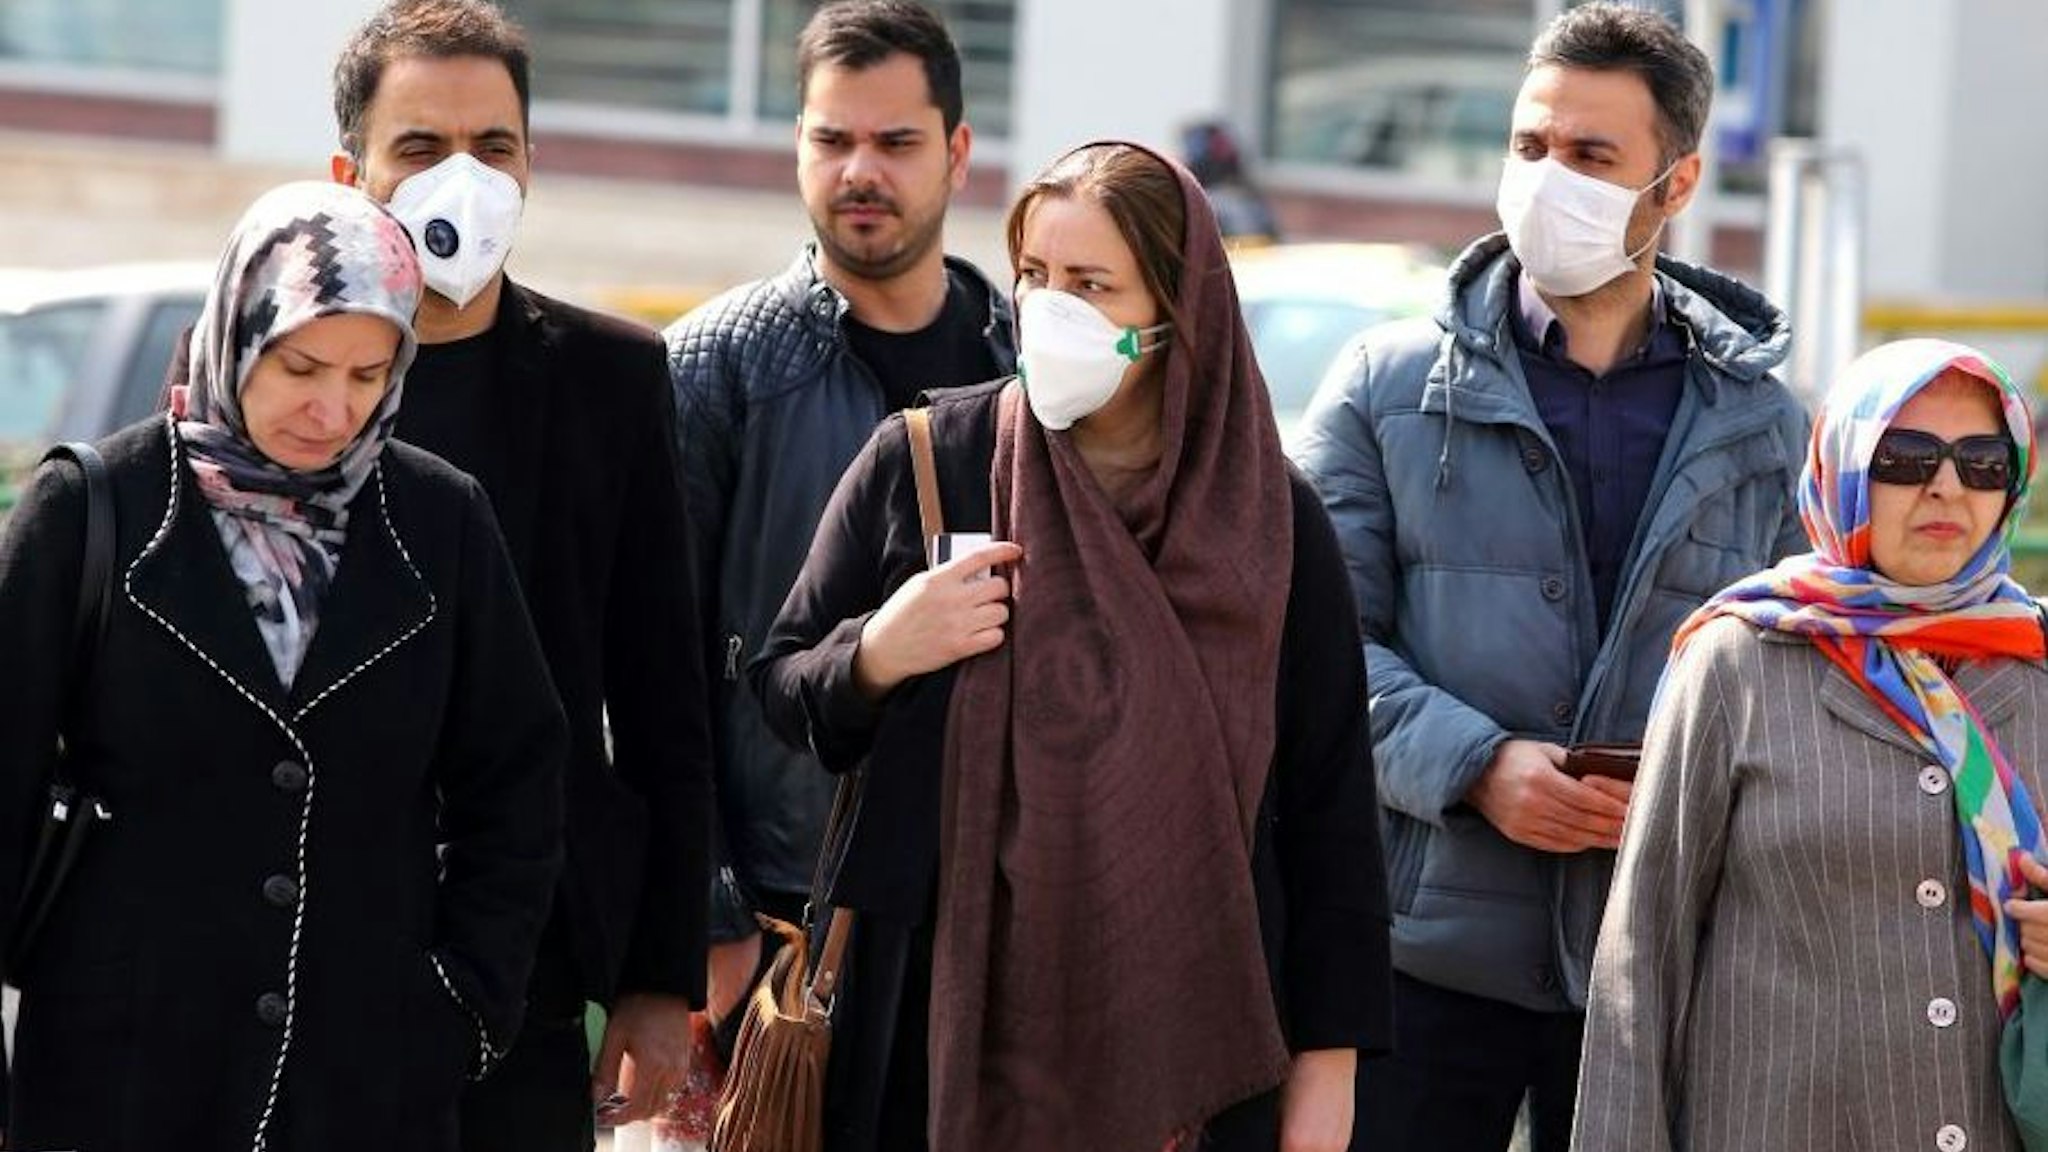 Iranians, some wearing protective masks, wait to cross a street in the capital Tehran on February 22, 2020. - Iran today reported one more death among 10 new cases of coronavirus, bringing the total number of deaths in the Islamic republic to five and infections to 28. (Photo by ATTA KENARE / AFP)